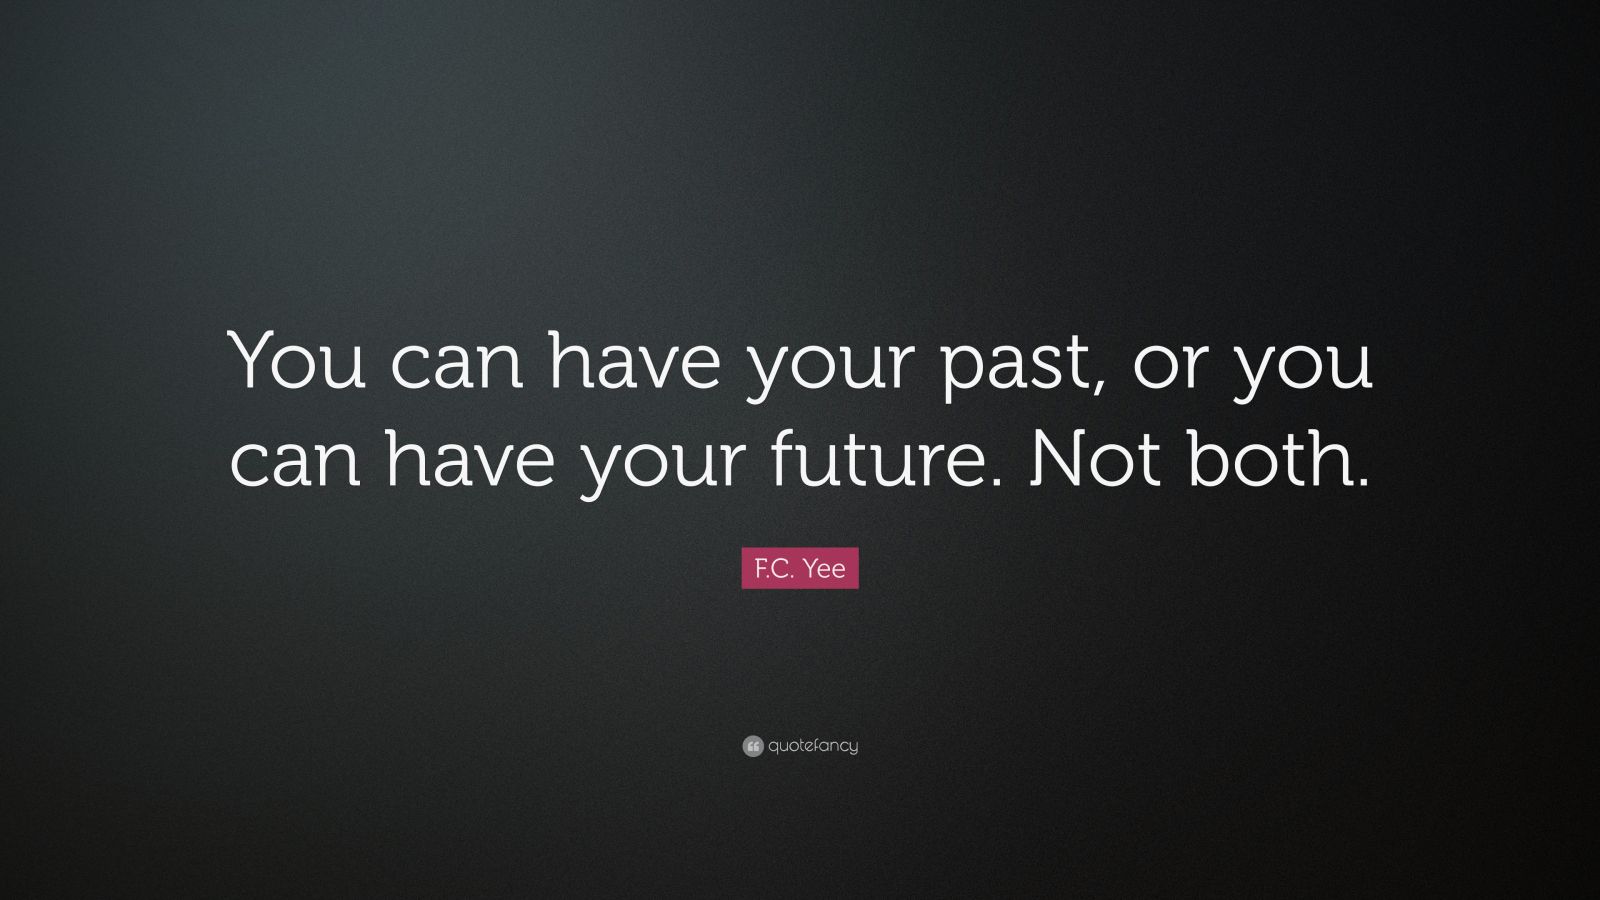 F.C. Yee Quote: “You can have your past, or you can have your future ...